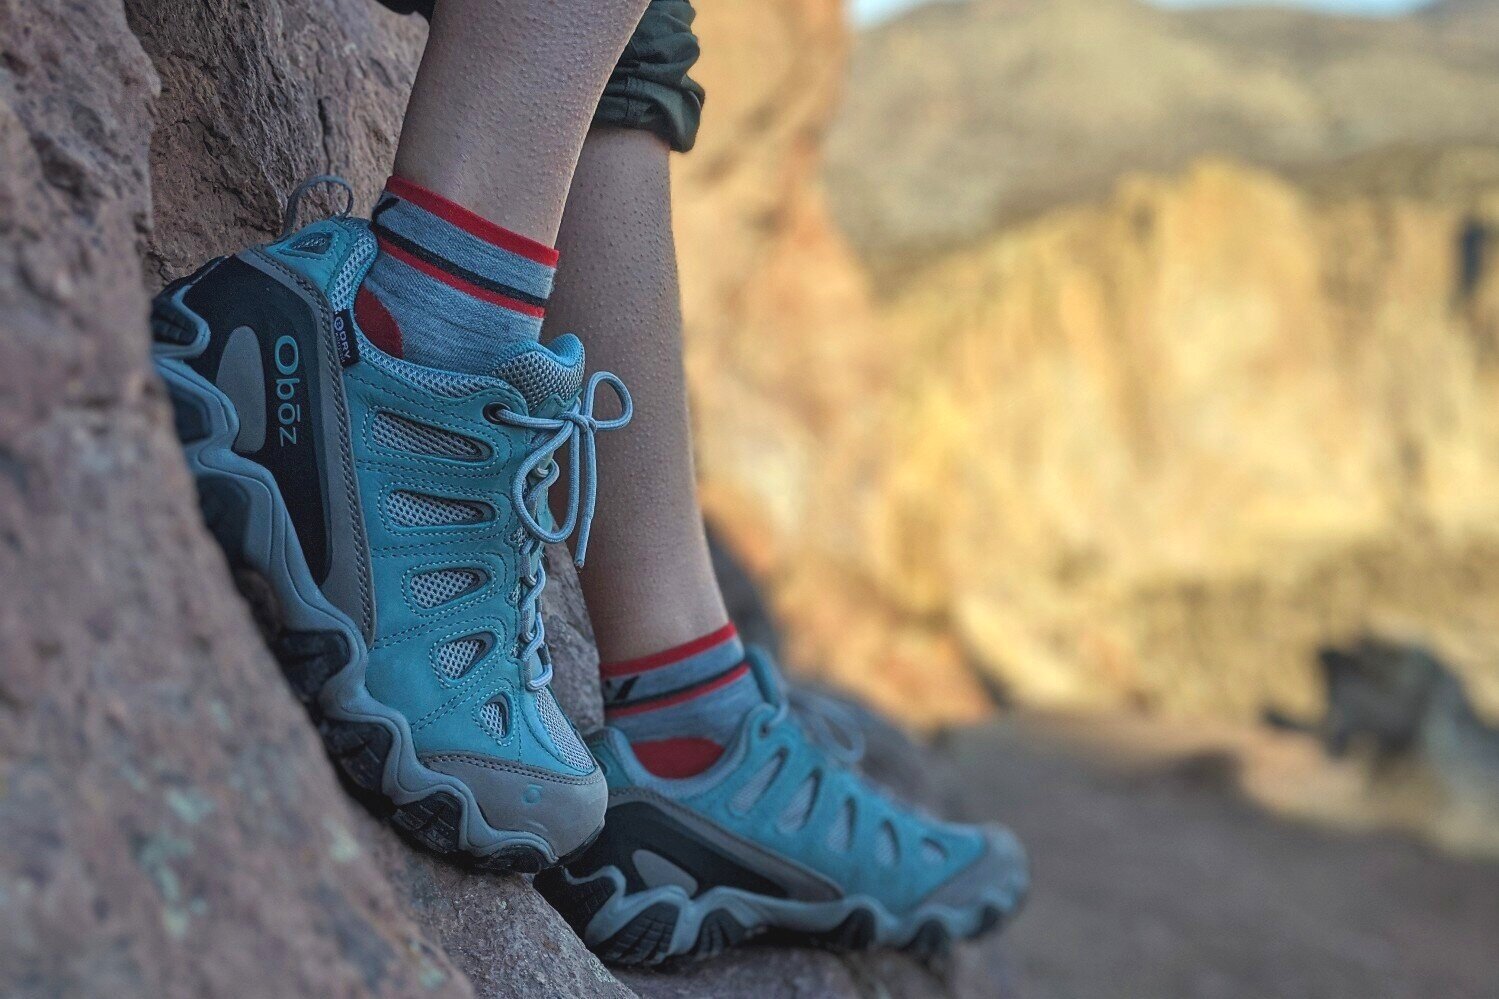 The Oboz Sawtooth II Low BDry are some of the most durable hiking shoes on our list, so they’re great for rugged terrain